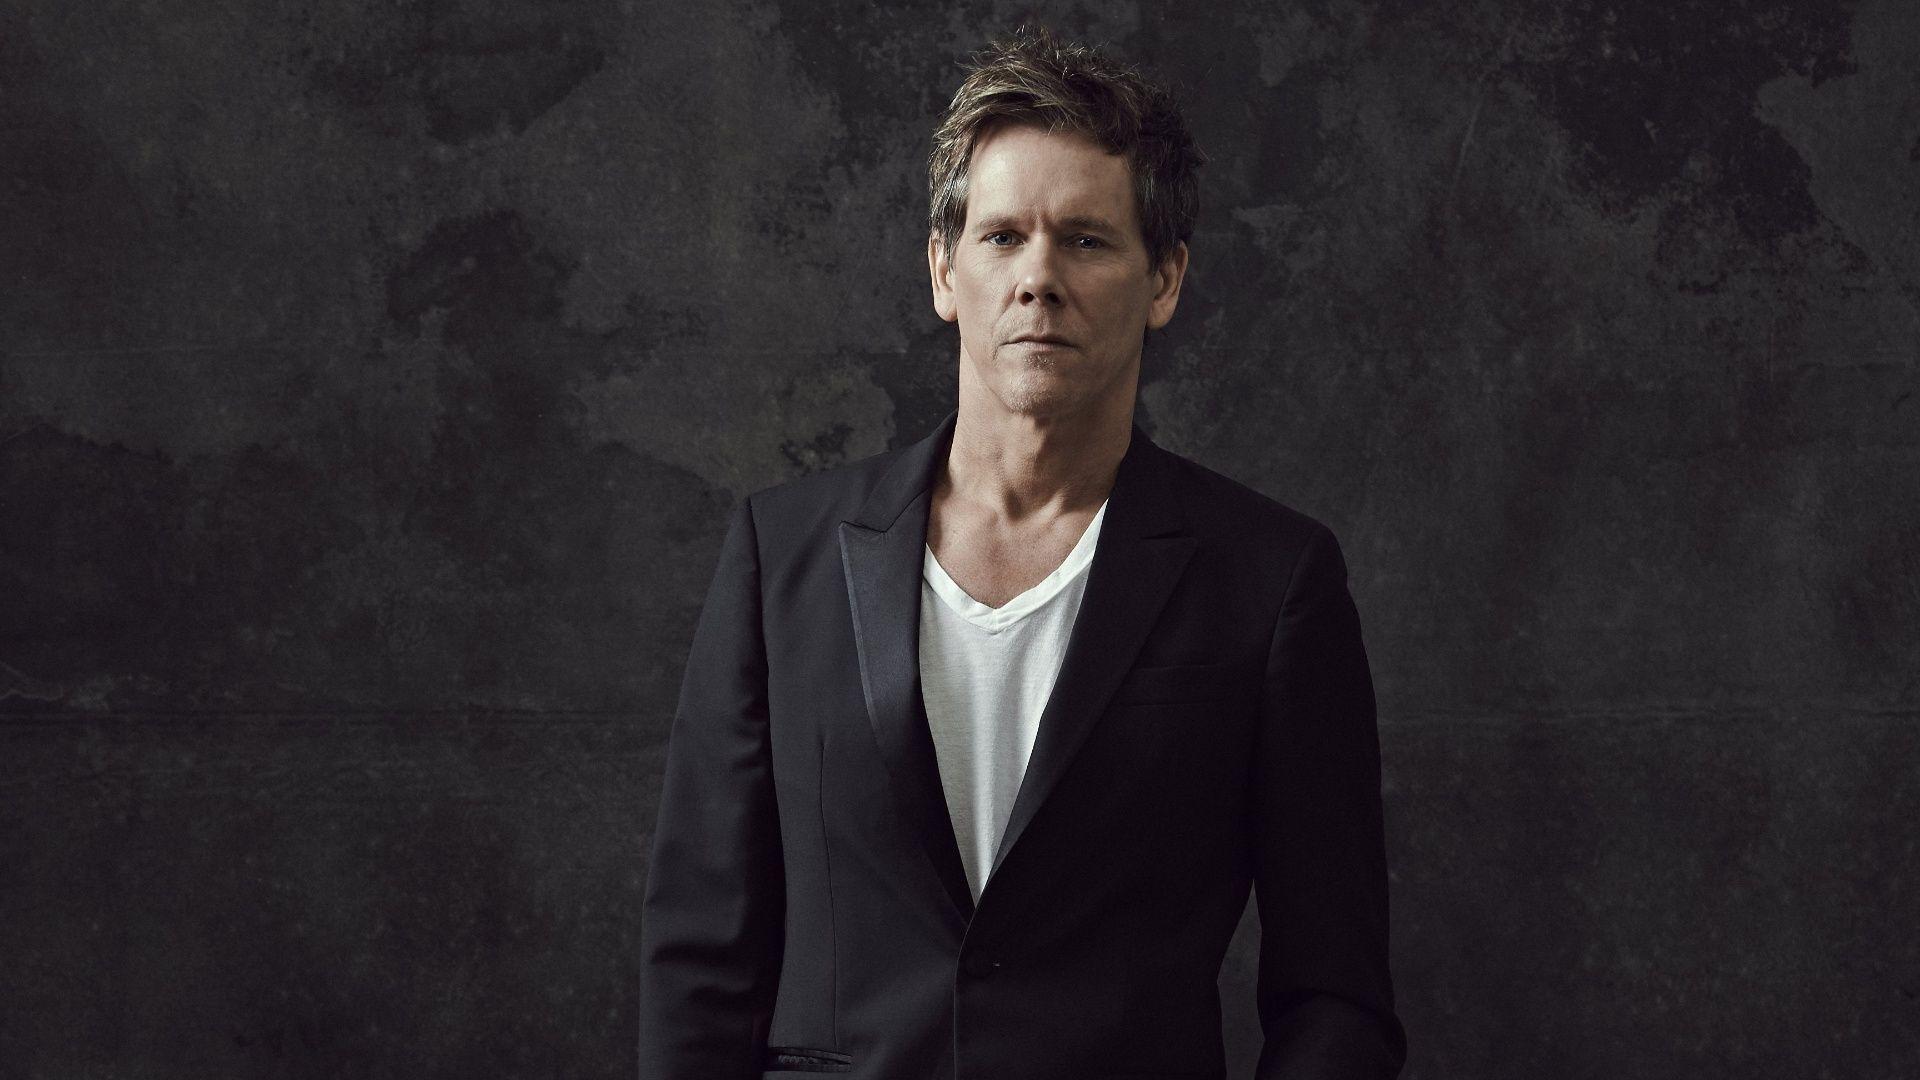 Kevin Bacon Free HD Wallpaper Image Background